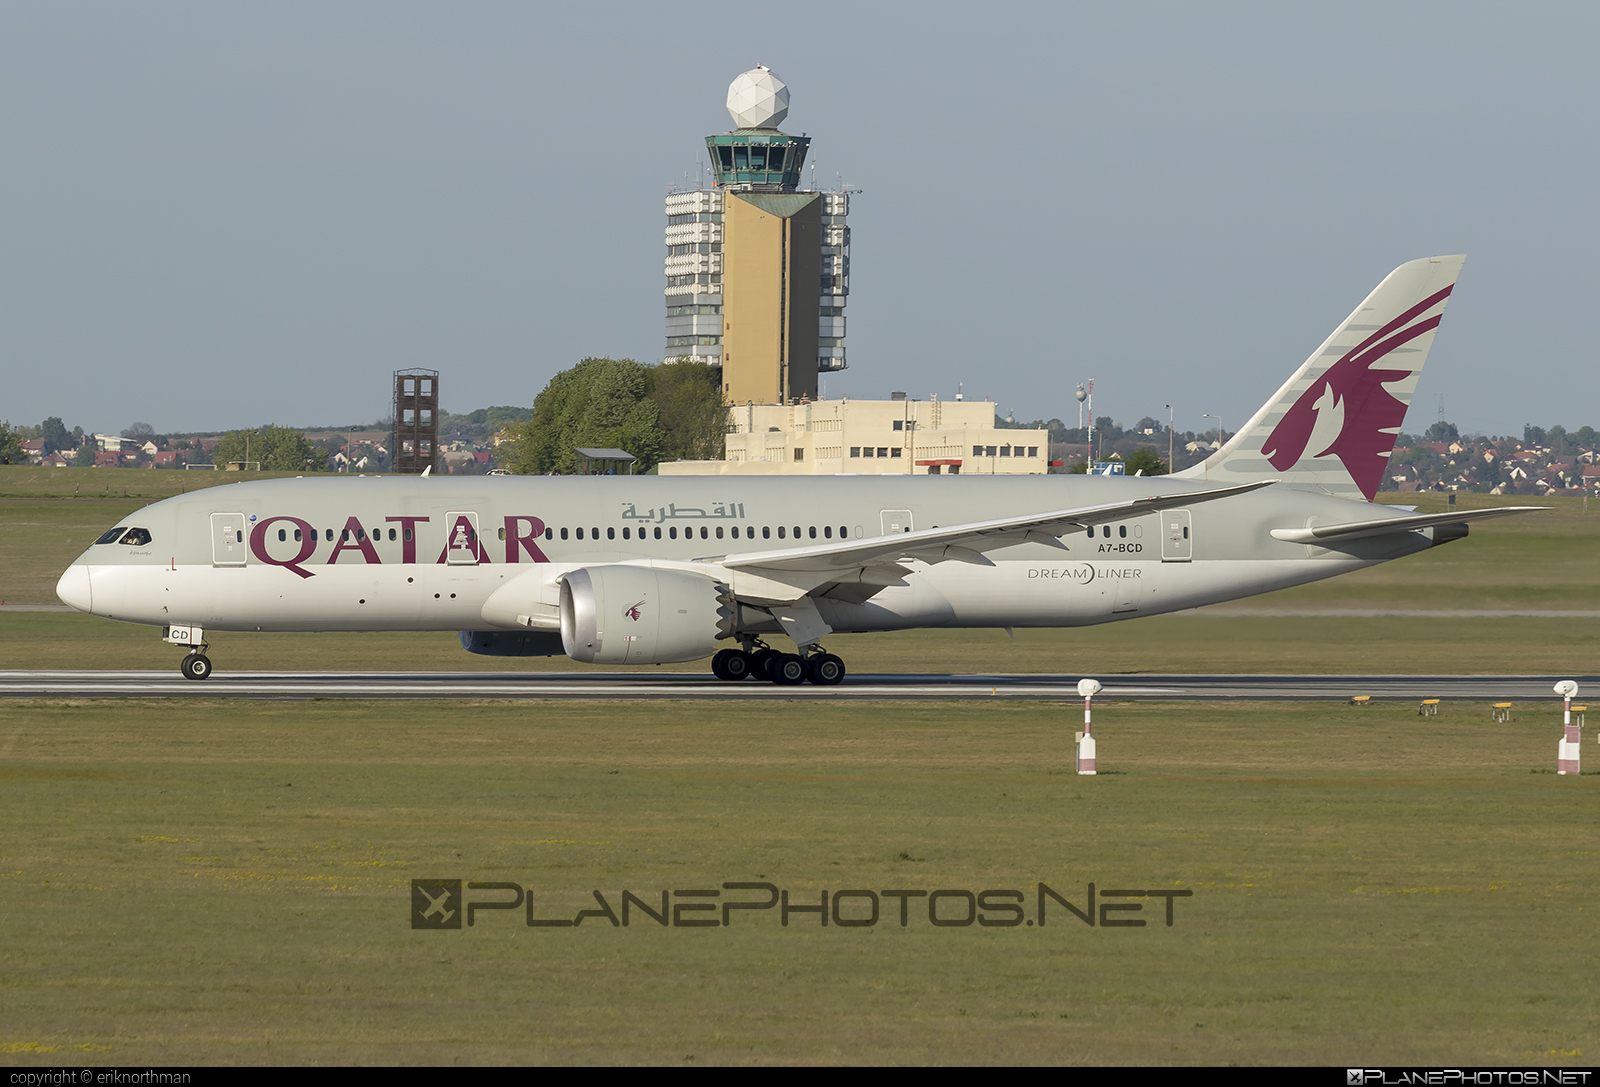 Boeing 787-8 Dreamliner - A7-BCD operated by Qatar Airways #b787 #boeing #boeing787 #dreamliner #qatarairways